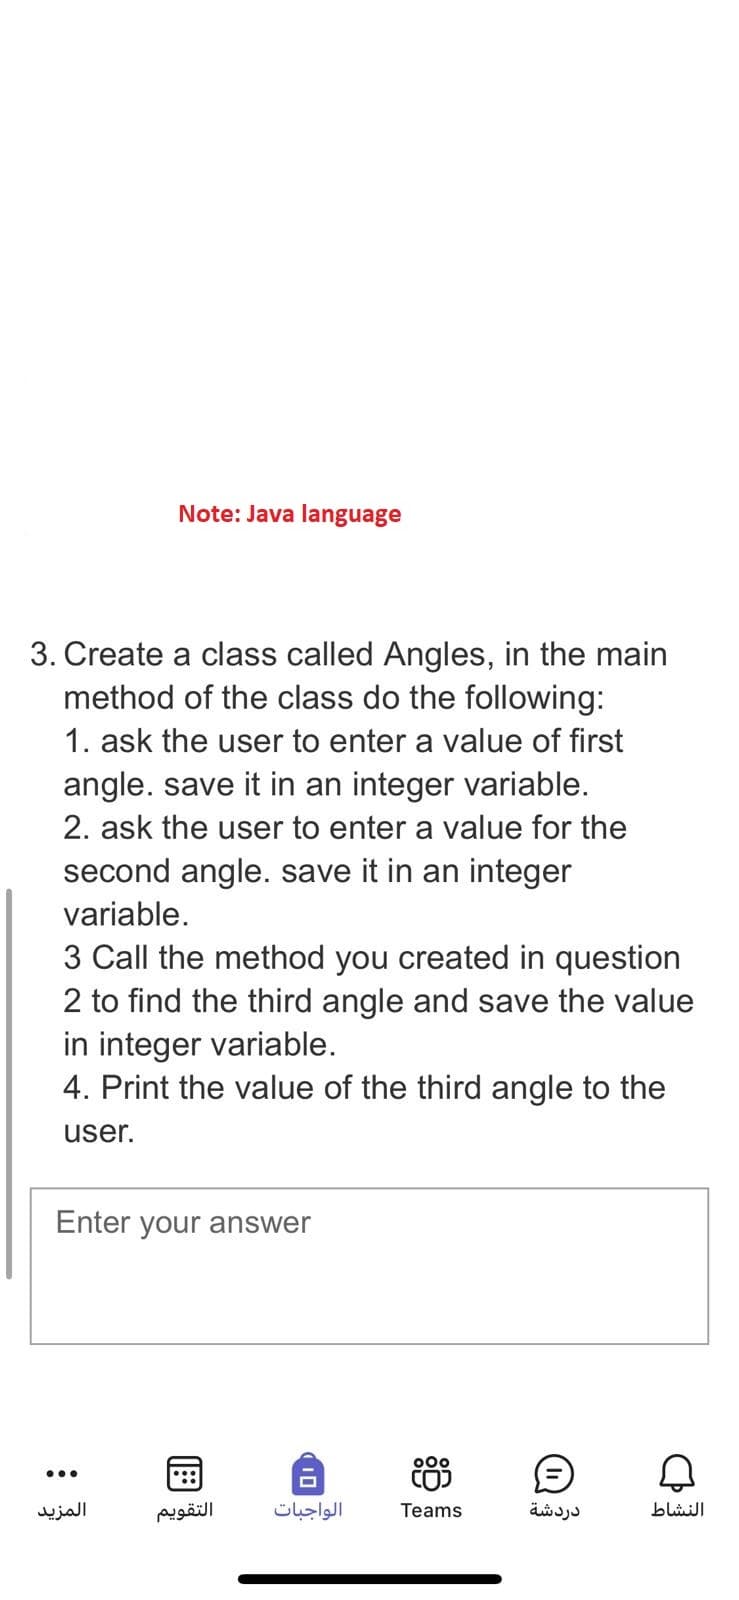 Note: Java language
3. Create a class called Angles, in the main
method of the class do the following:
1. ask the user to enter a value of first
angle. save it in an integer variable.
2. ask the user to enter a value for the
second angle. save it in an integer
variable.
3 Call the method you created in question
2 to find the third angle and save the value
in integer variable.
4. Print the value of the third angle to the
user.
Enter your answer
Ⓒ Q
...
المزيد
التقويم
الواجبات
000
CO)
Teams
دردشة
النشاط